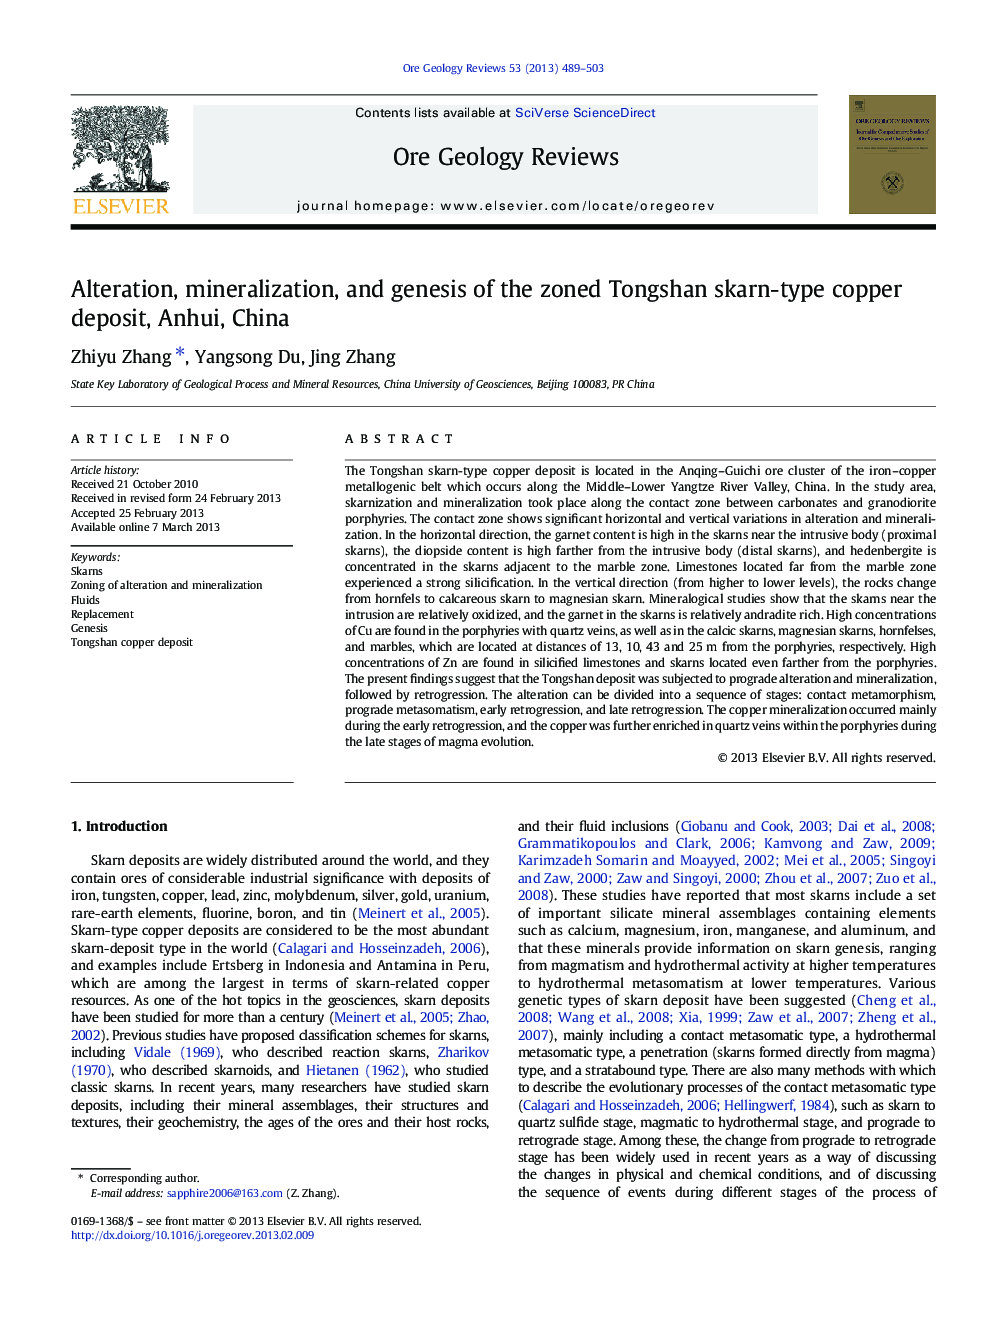 Alteration, mineralization, and genesis of the zoned Tongshan skarn-type copper deposit, Anhui, China